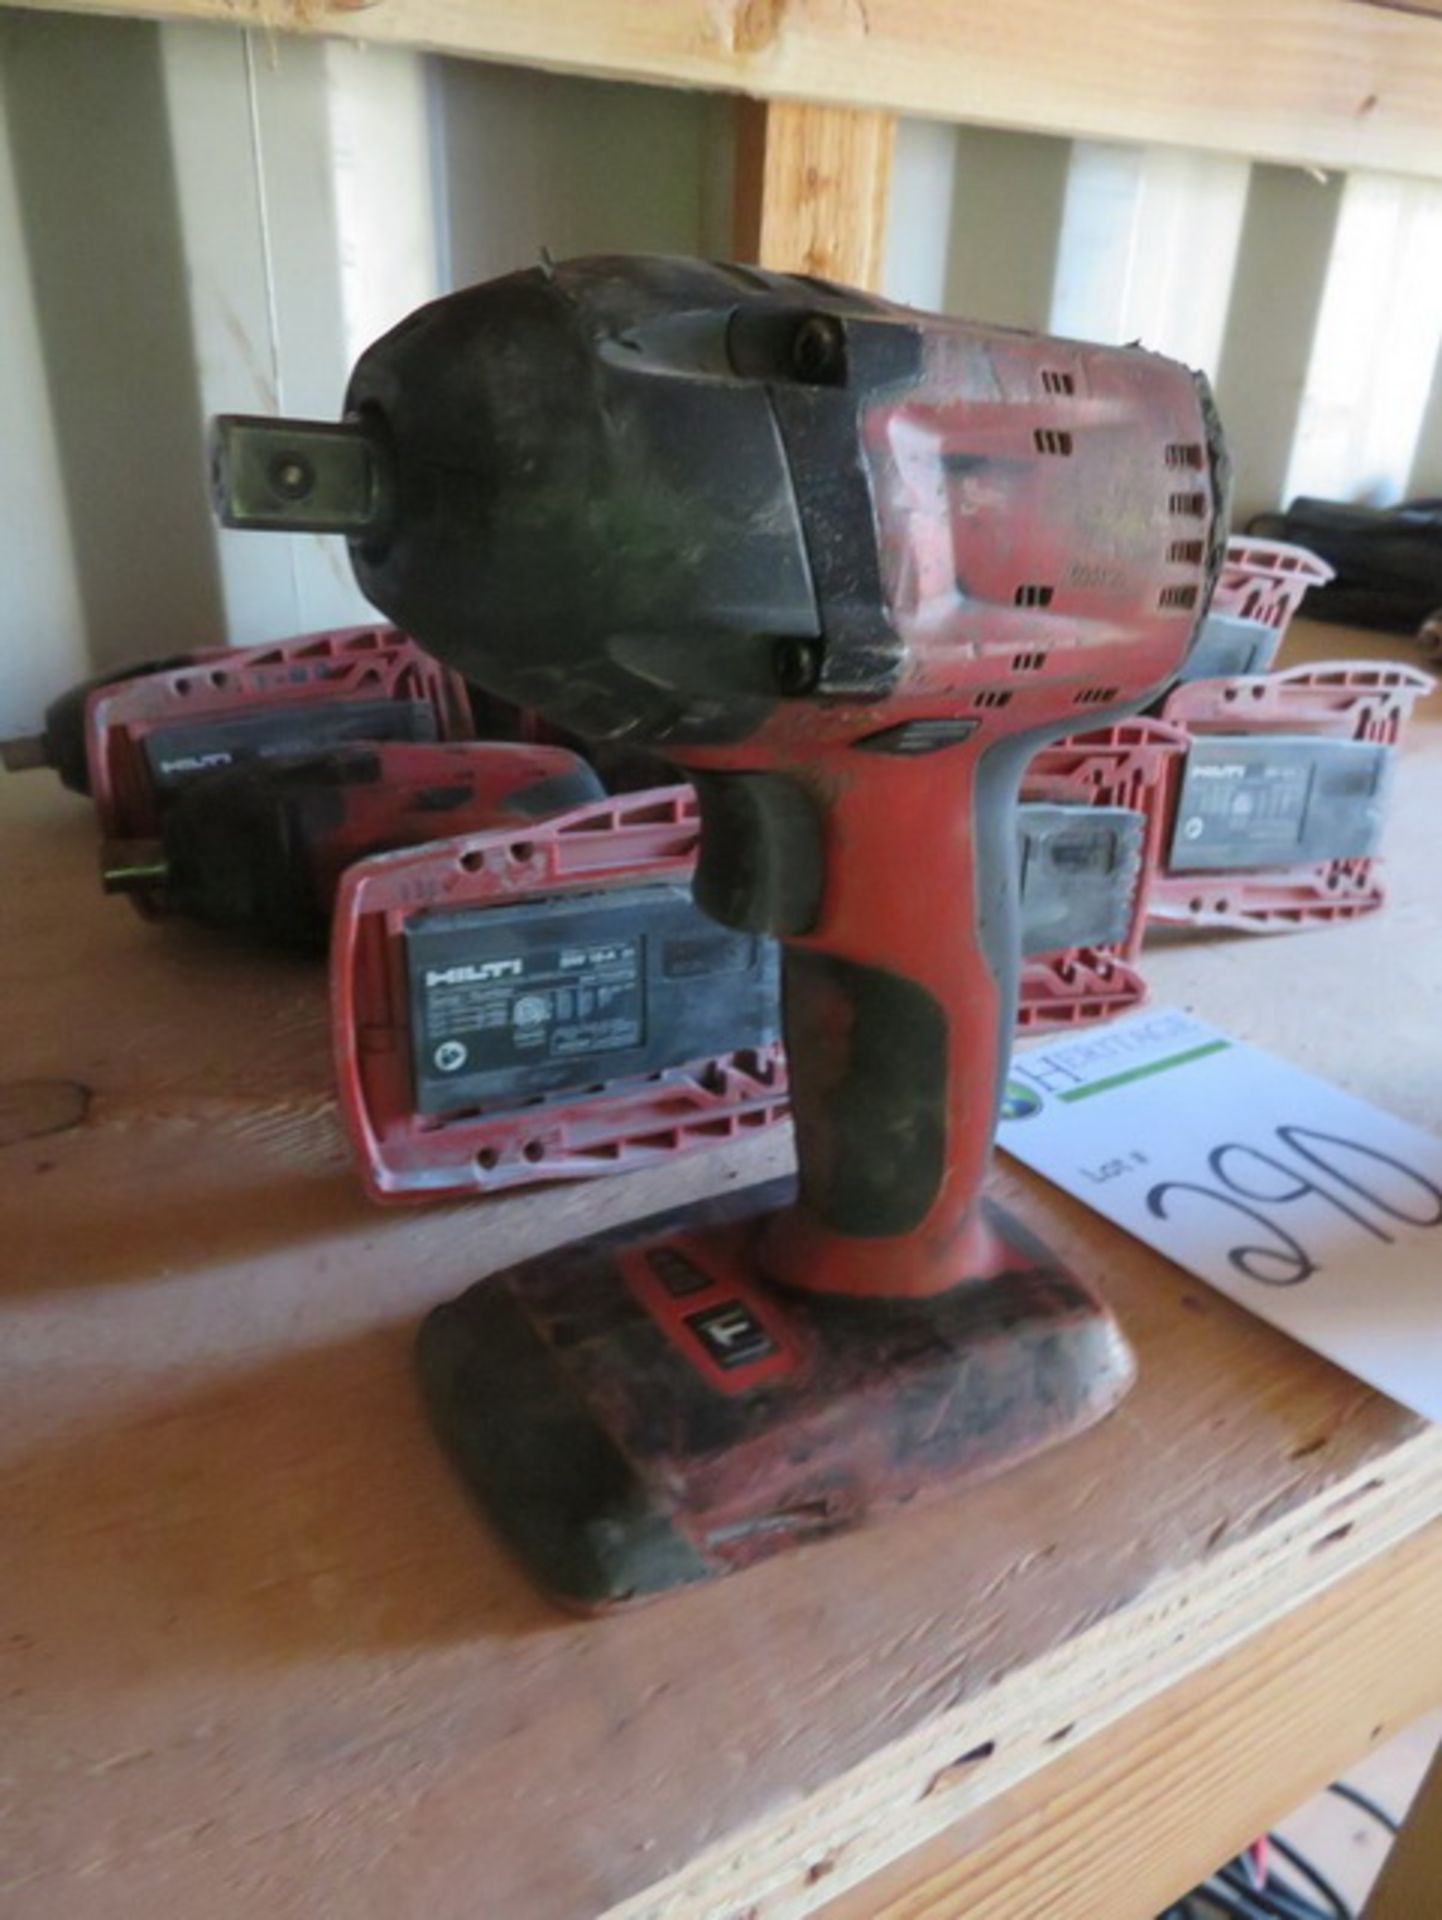 Hilti SIW-18-A Lot: (8) 1/2" 18V Cordless Impact Drivers. (Missing Batteries). Asset Located at - Image 2 of 2